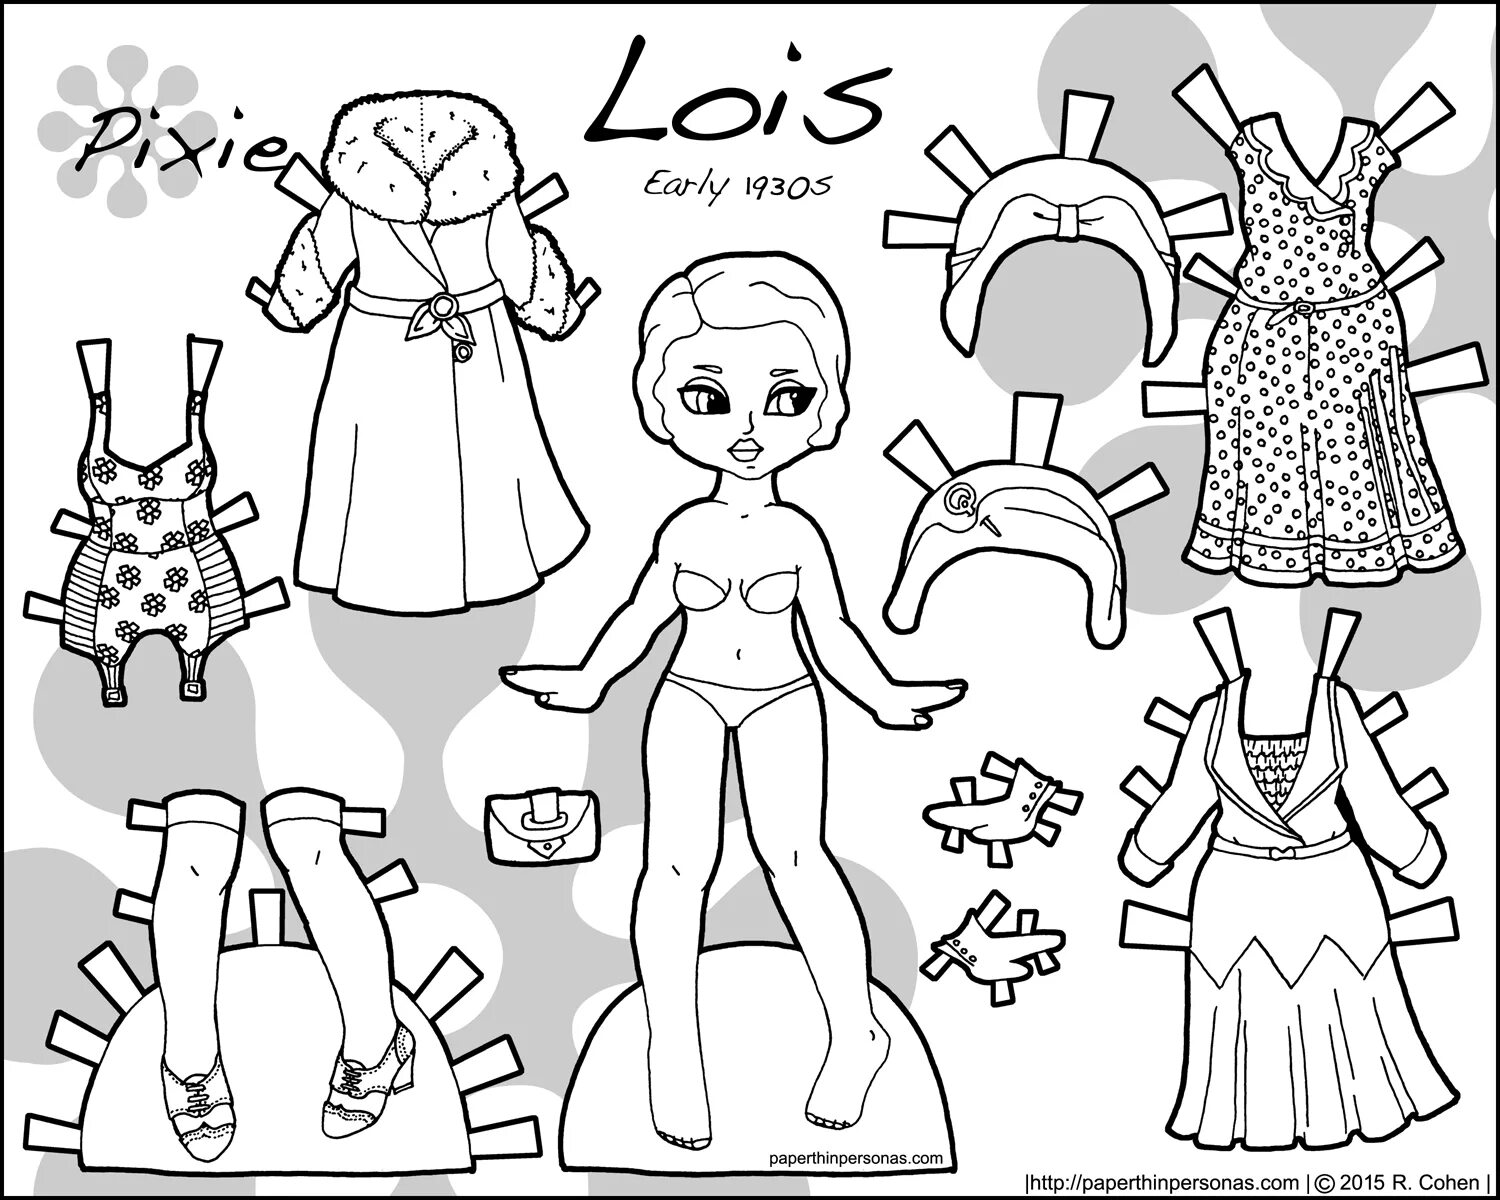 Paper lol doll with cutout clothes black and white #9